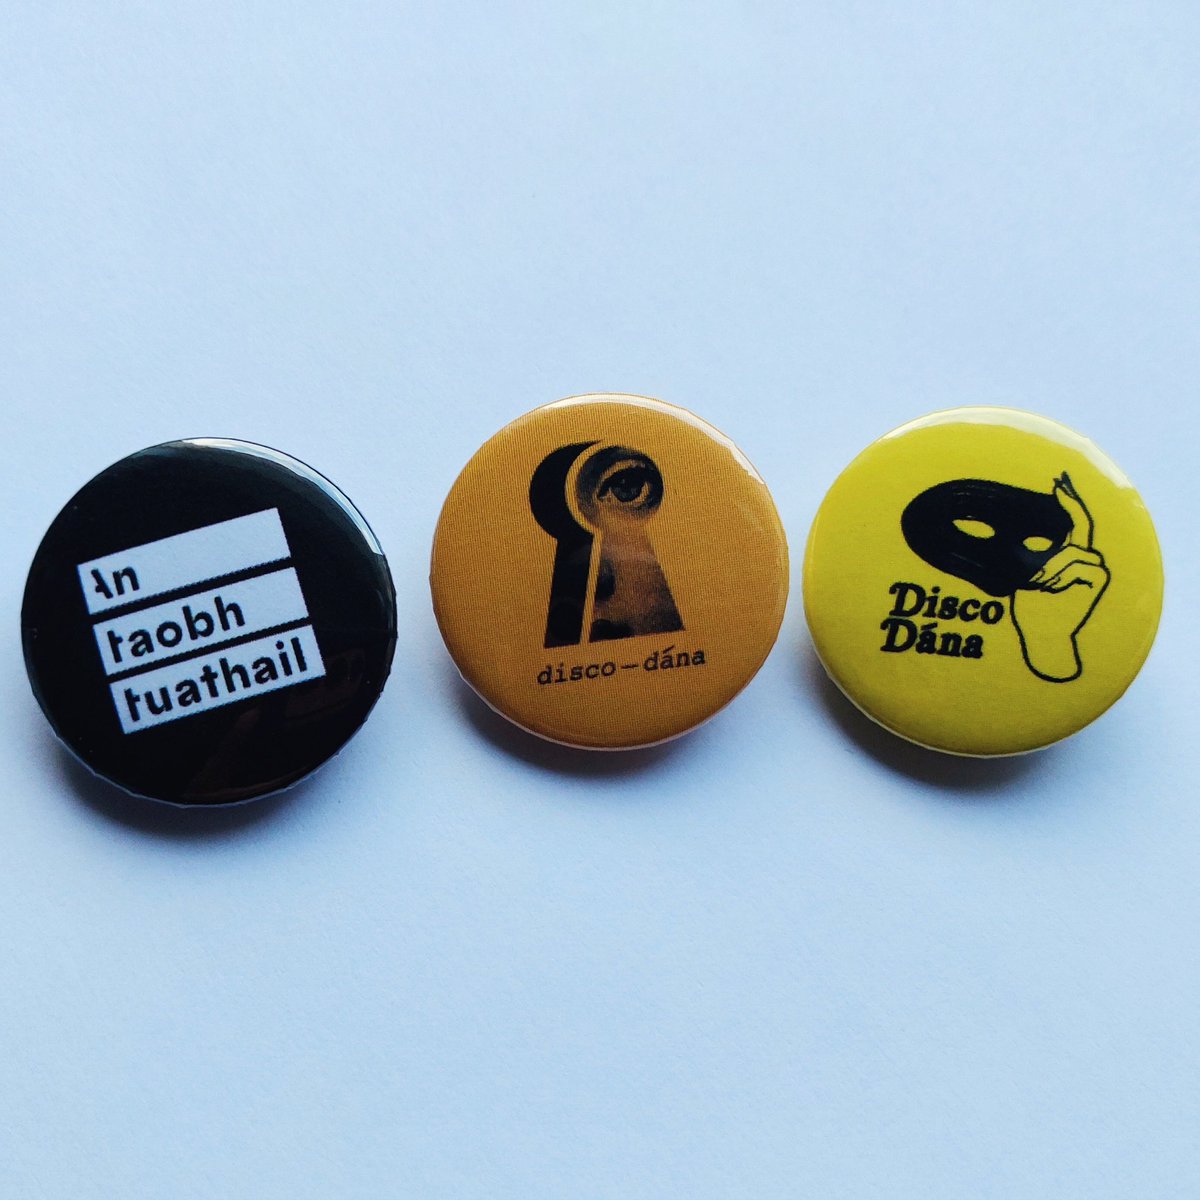 Badge perverts! Check out these striking new designs by Jon Averill , made by Klara at Spike Badges. Available at Disco Dána at Cuba, Gaillimh tonight (dóirse 22:00 - last few tix on eventbrite) & at next Disco Dána at @hensteethstudio on Friday 31st May.